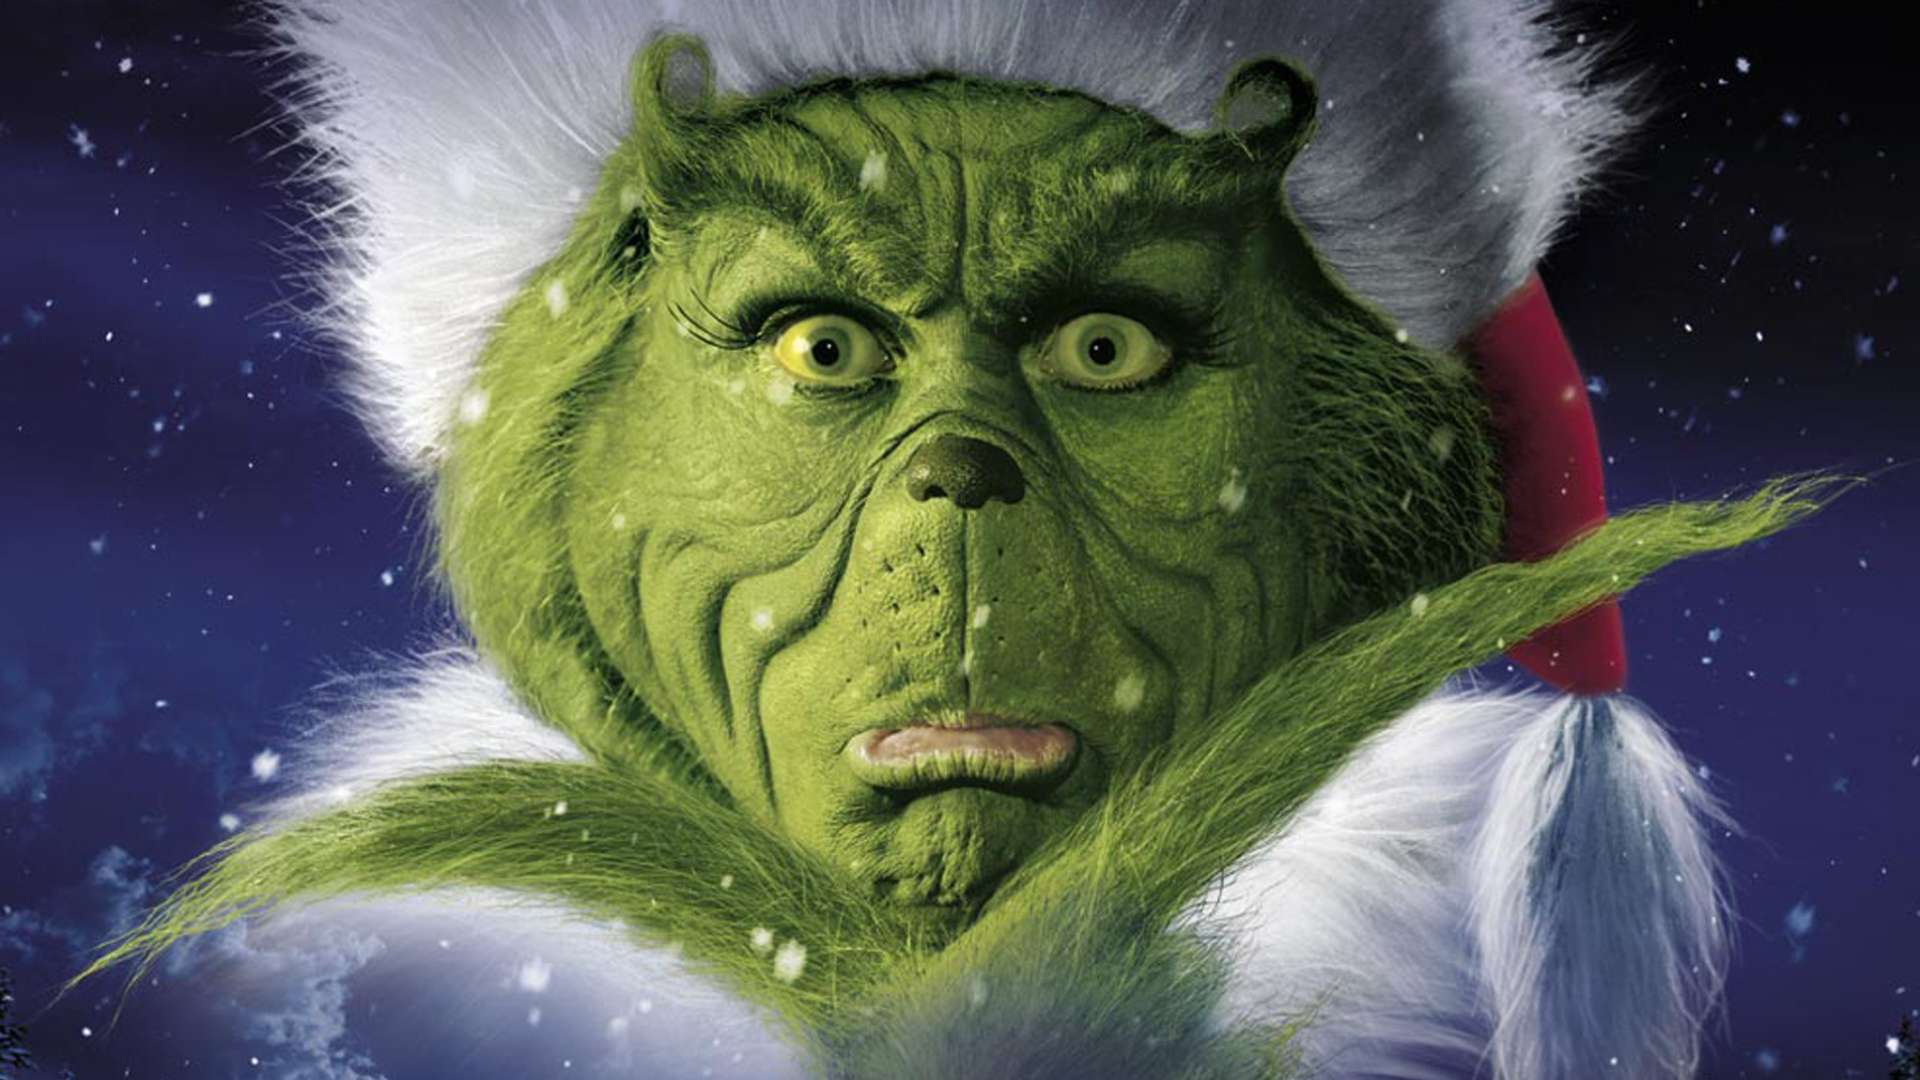 Don’t Let the Grinch Steal Christmas 2